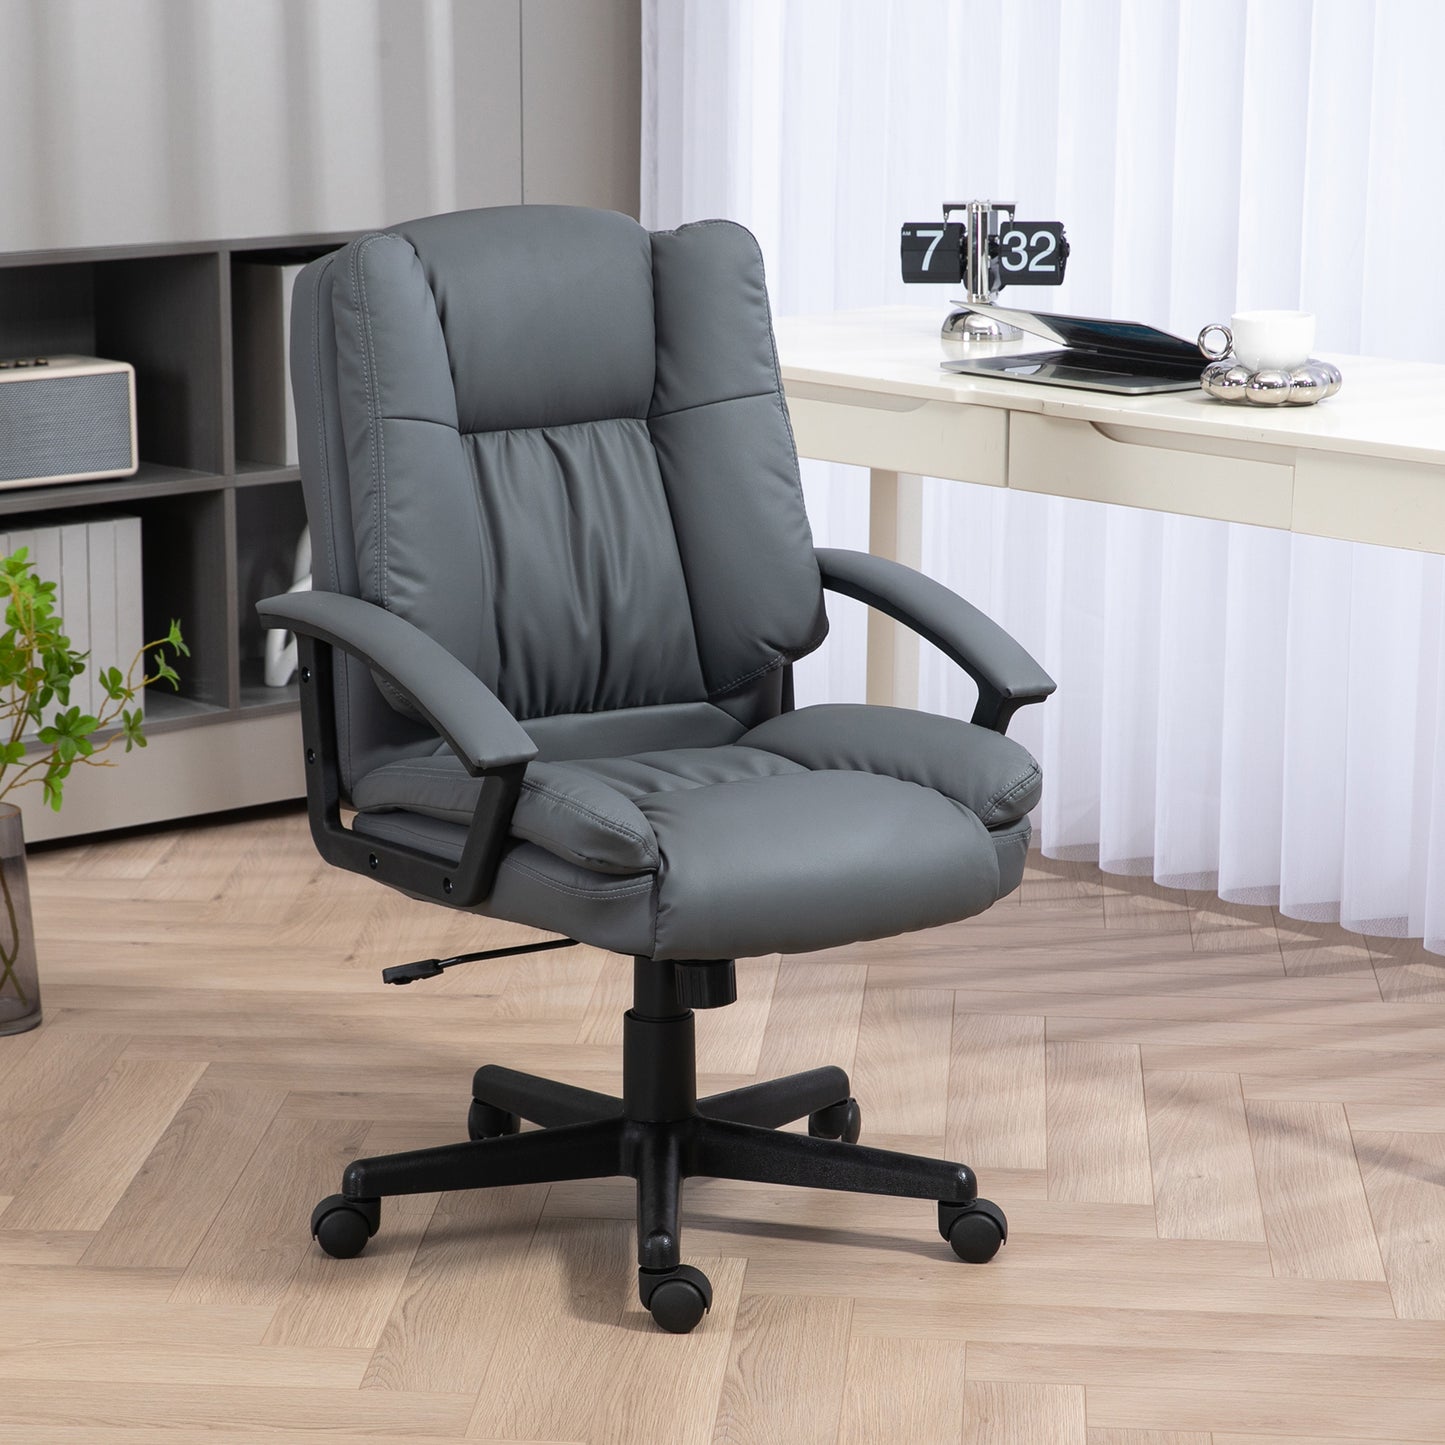 Vinsetto Office Chair, Faux Leather Computer Desk Chair, Mid Back Executive Chair with Adjustable Height and Swivel Rolling Wheels for Home Study, Dark Grey